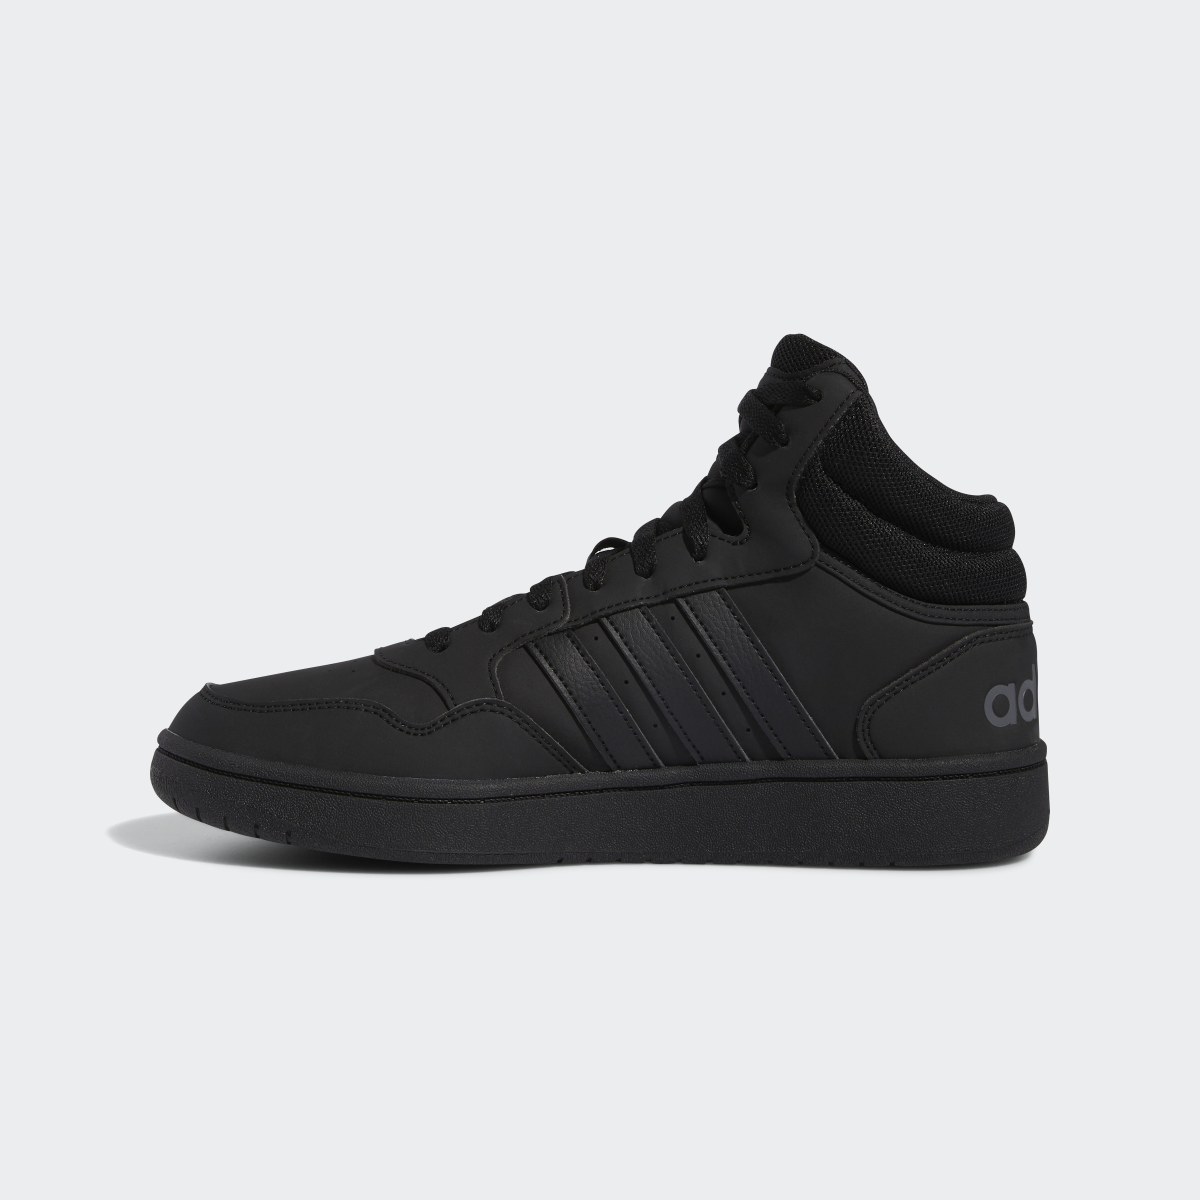 Adidas Hoops 3 Mid Lifestyle Basketball Mid Classic Schuh. 7